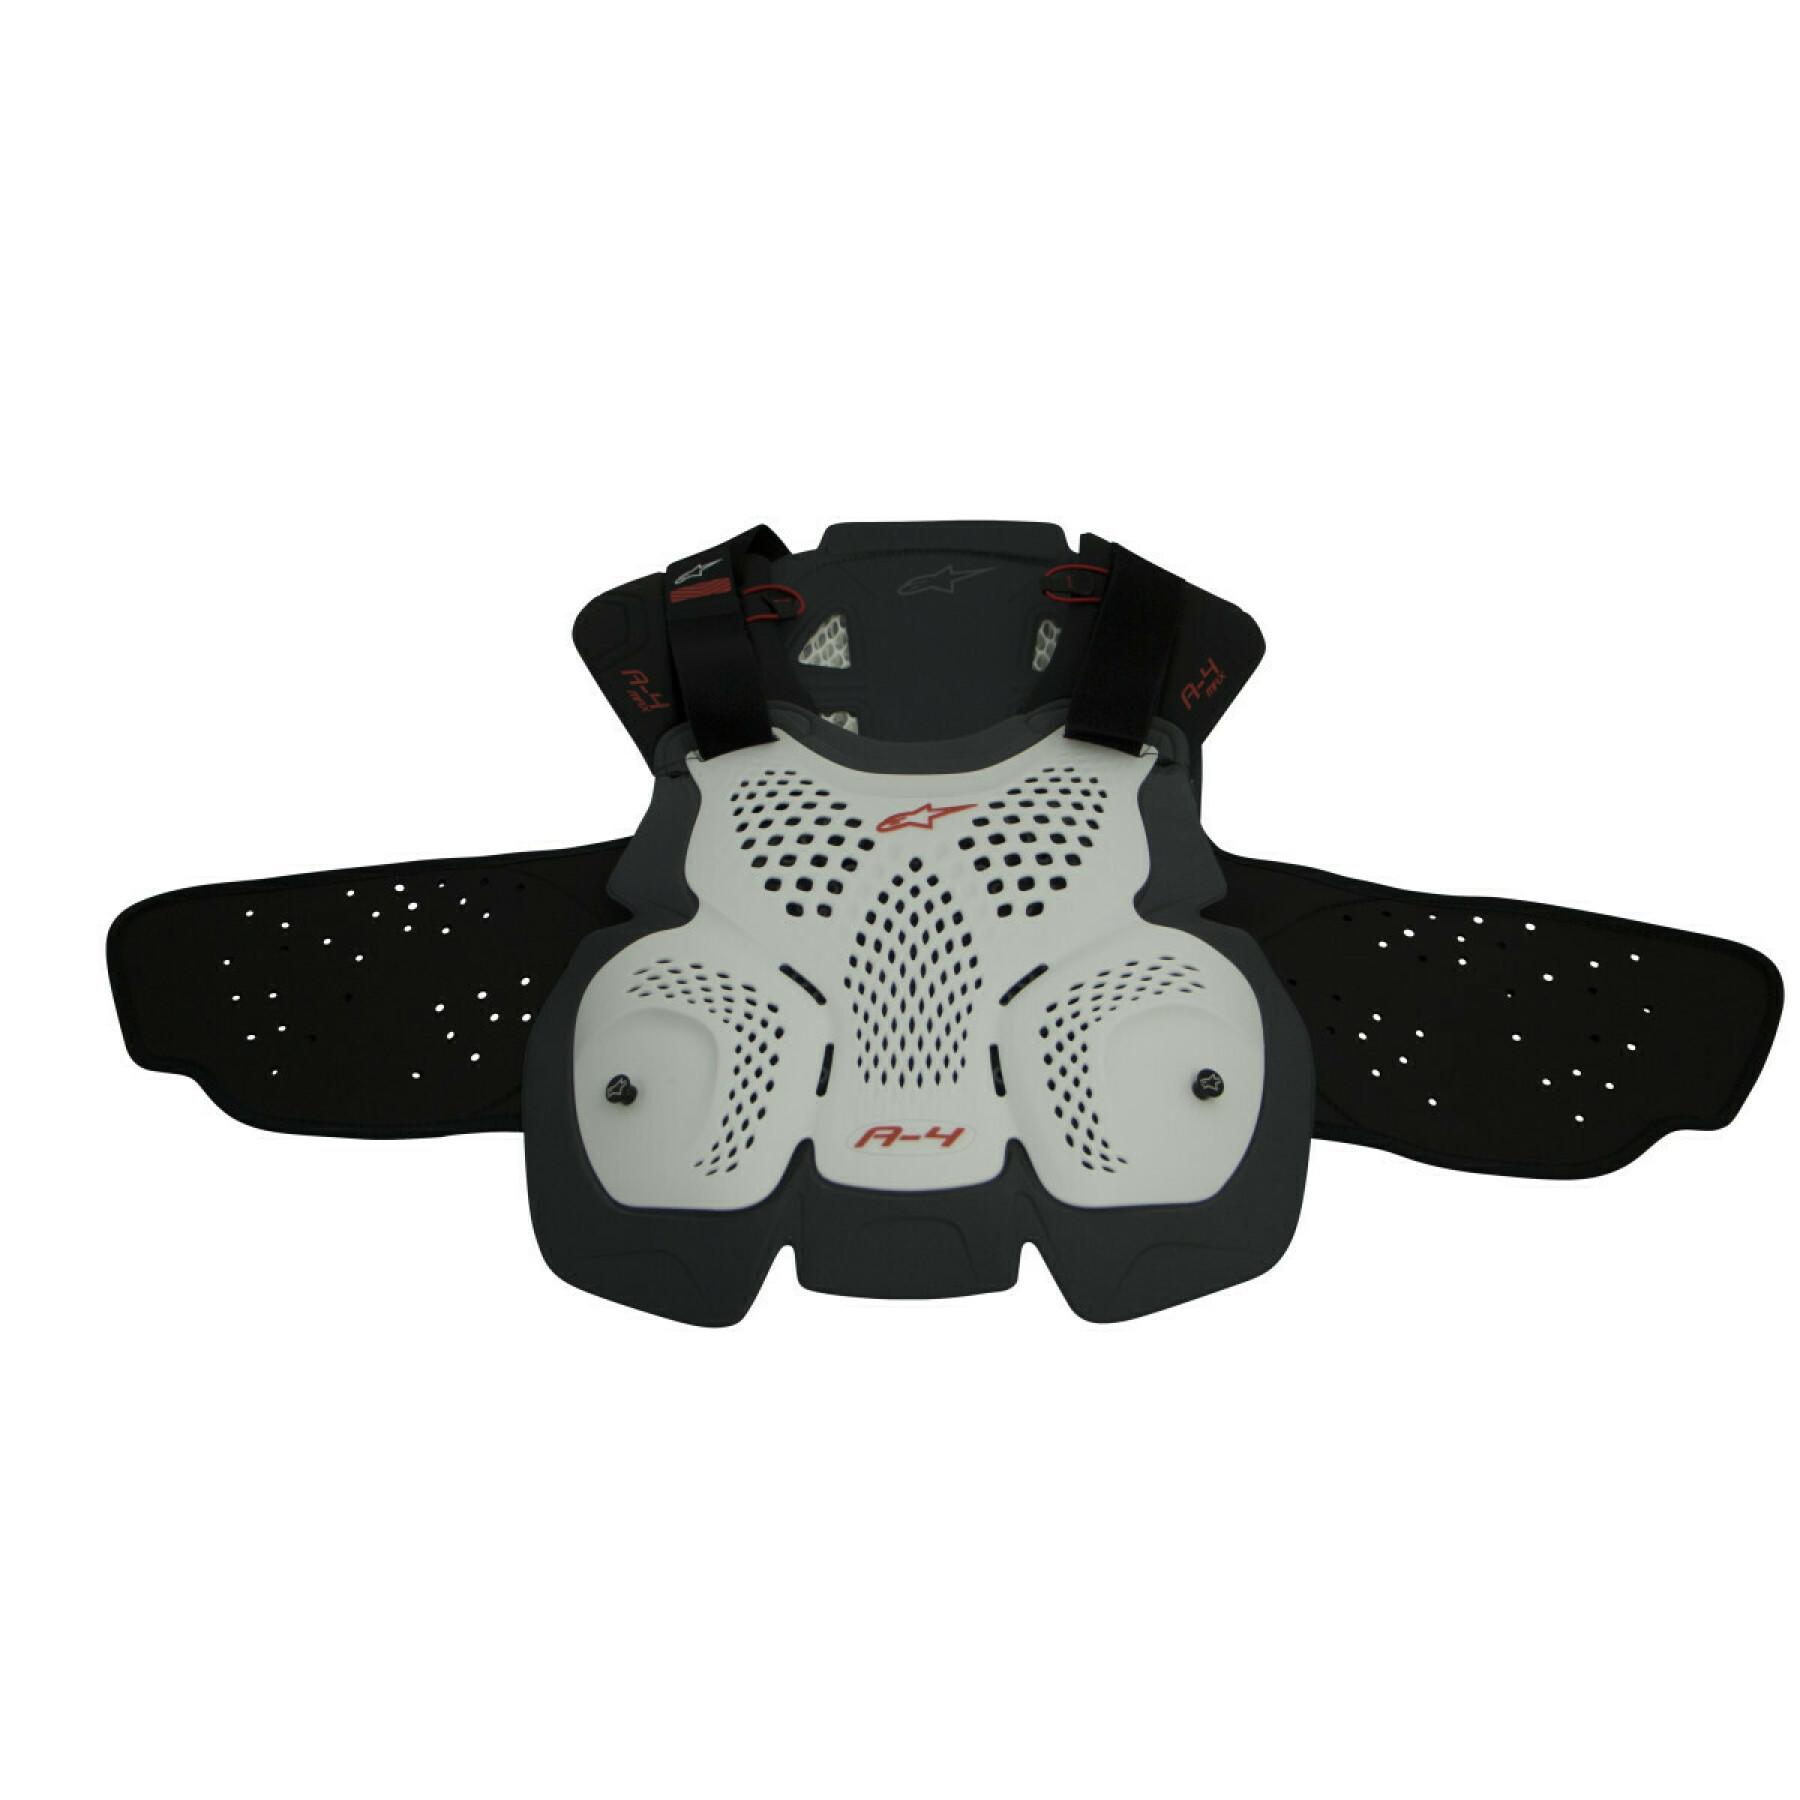 Stone guard motorcycle cross Alpinestars roost guard A-4 MAX WR